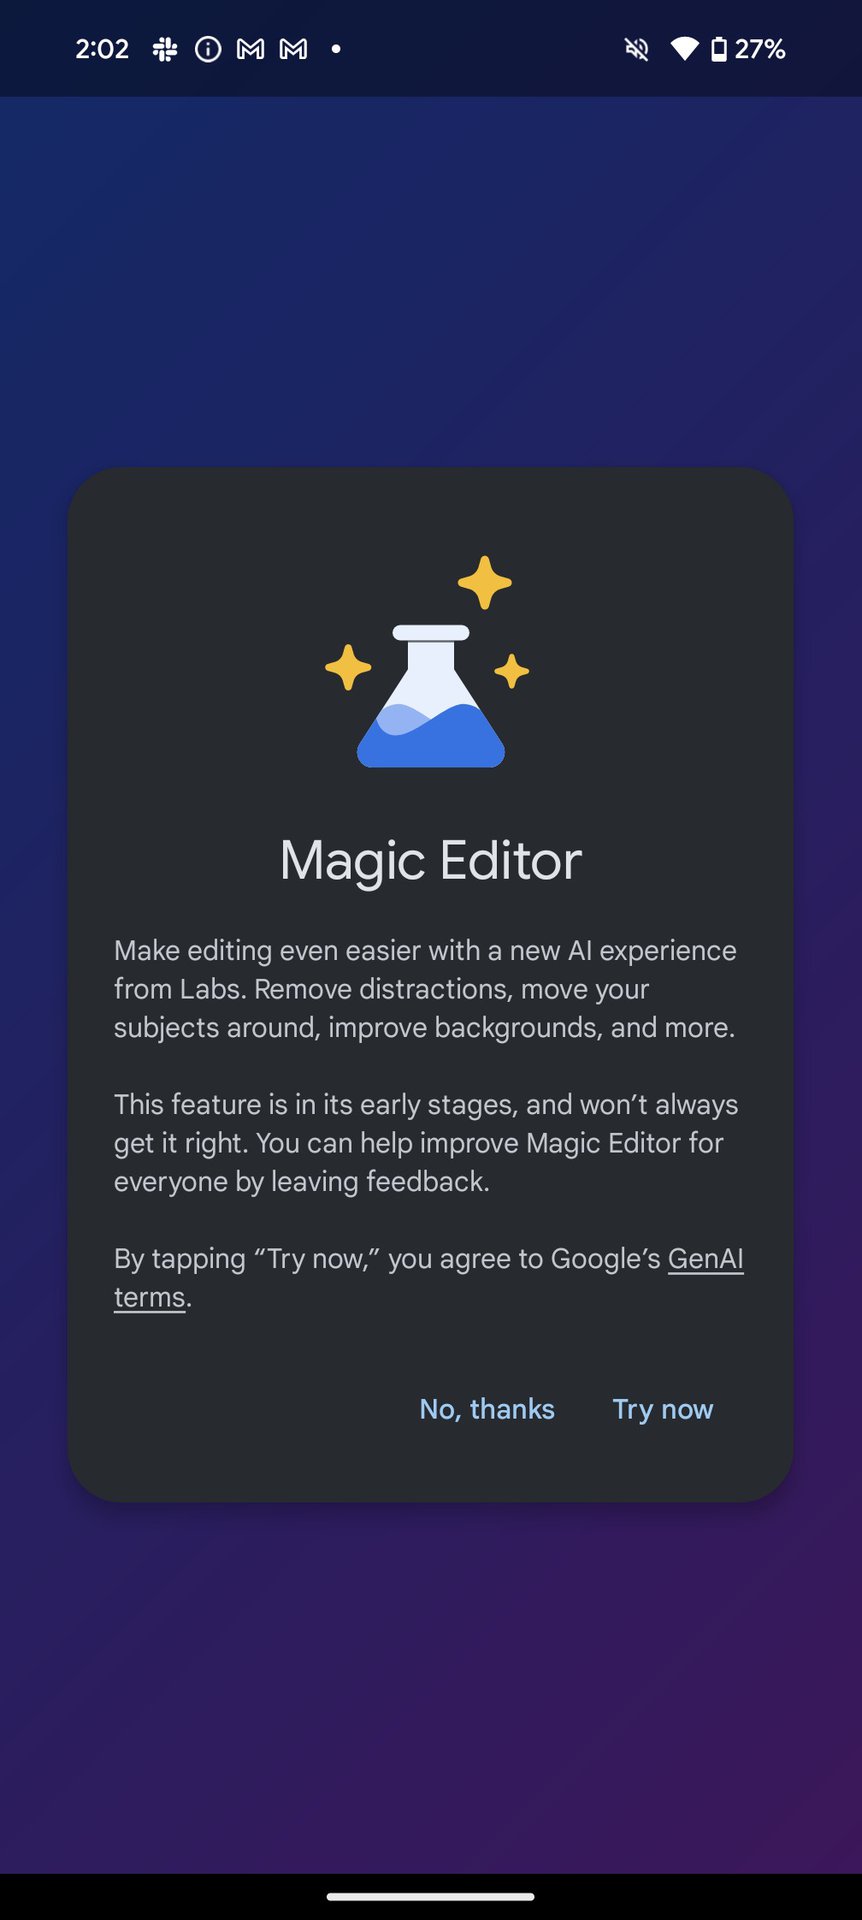 Google Photos Gets a New Magic Editor: Here's How It Works - CNET